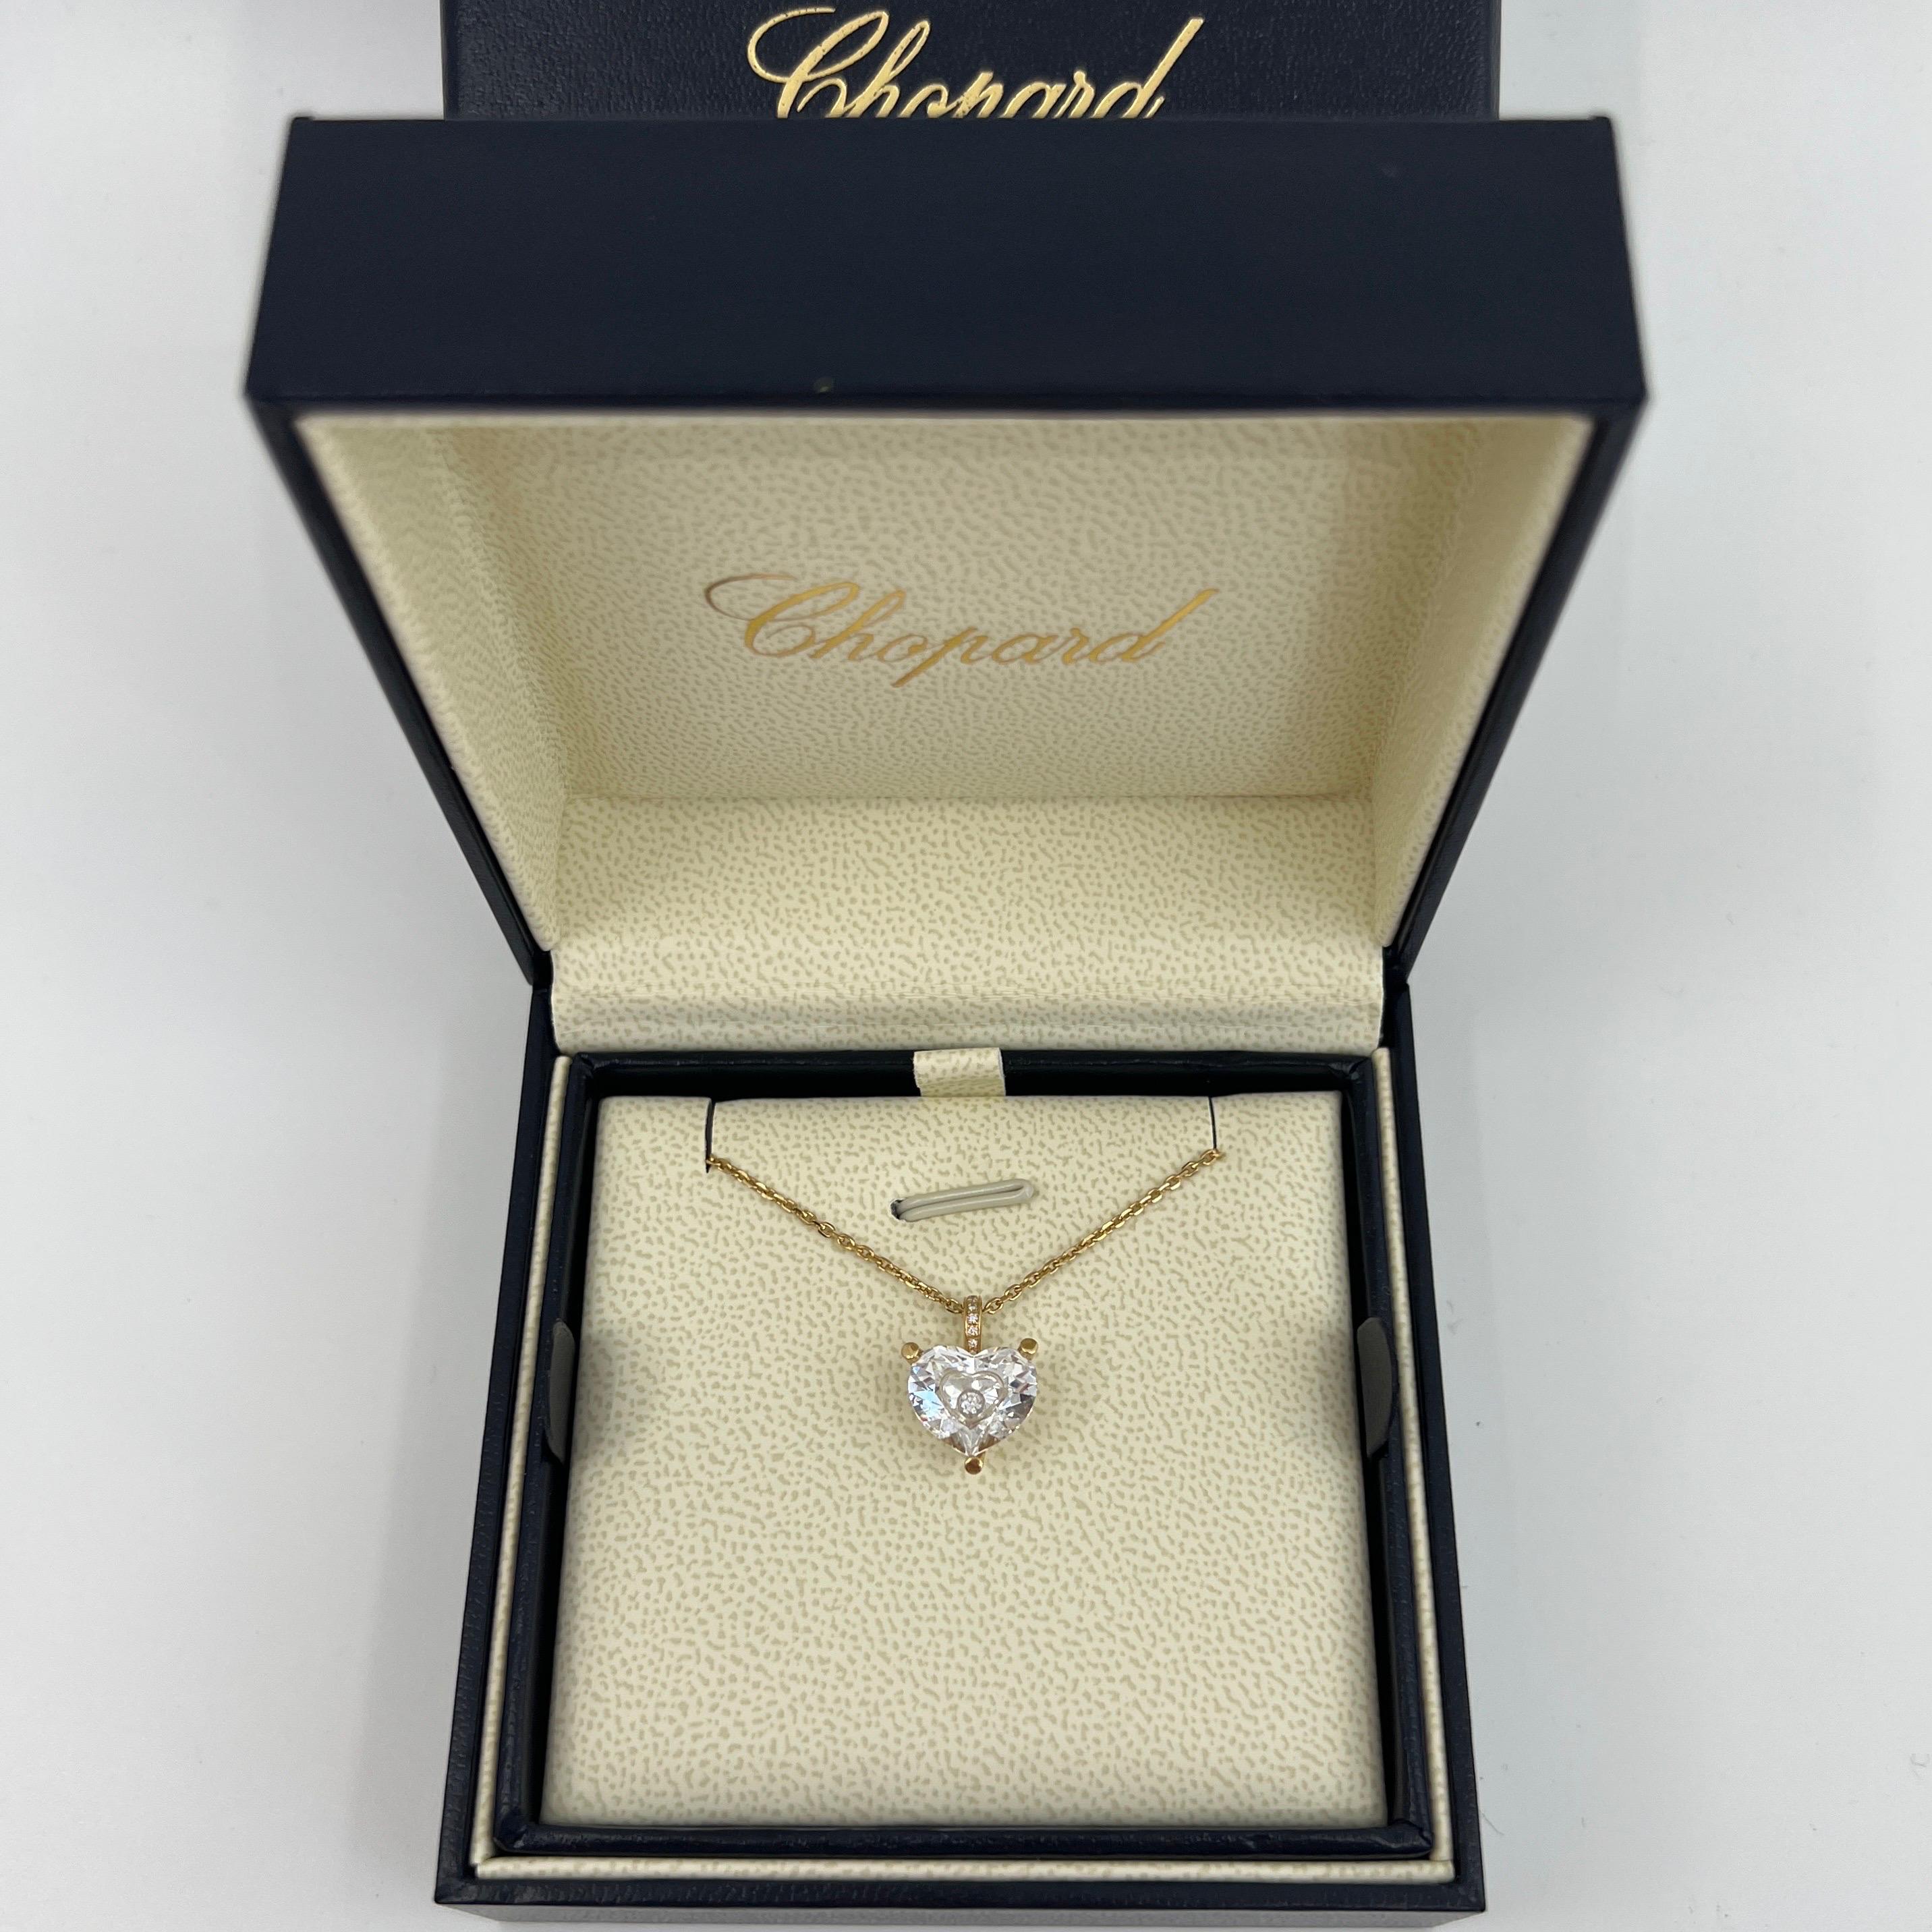 Chopard So Happy Diamonds Heart 18k Yellow Gold Pendant Necklace with Box 1